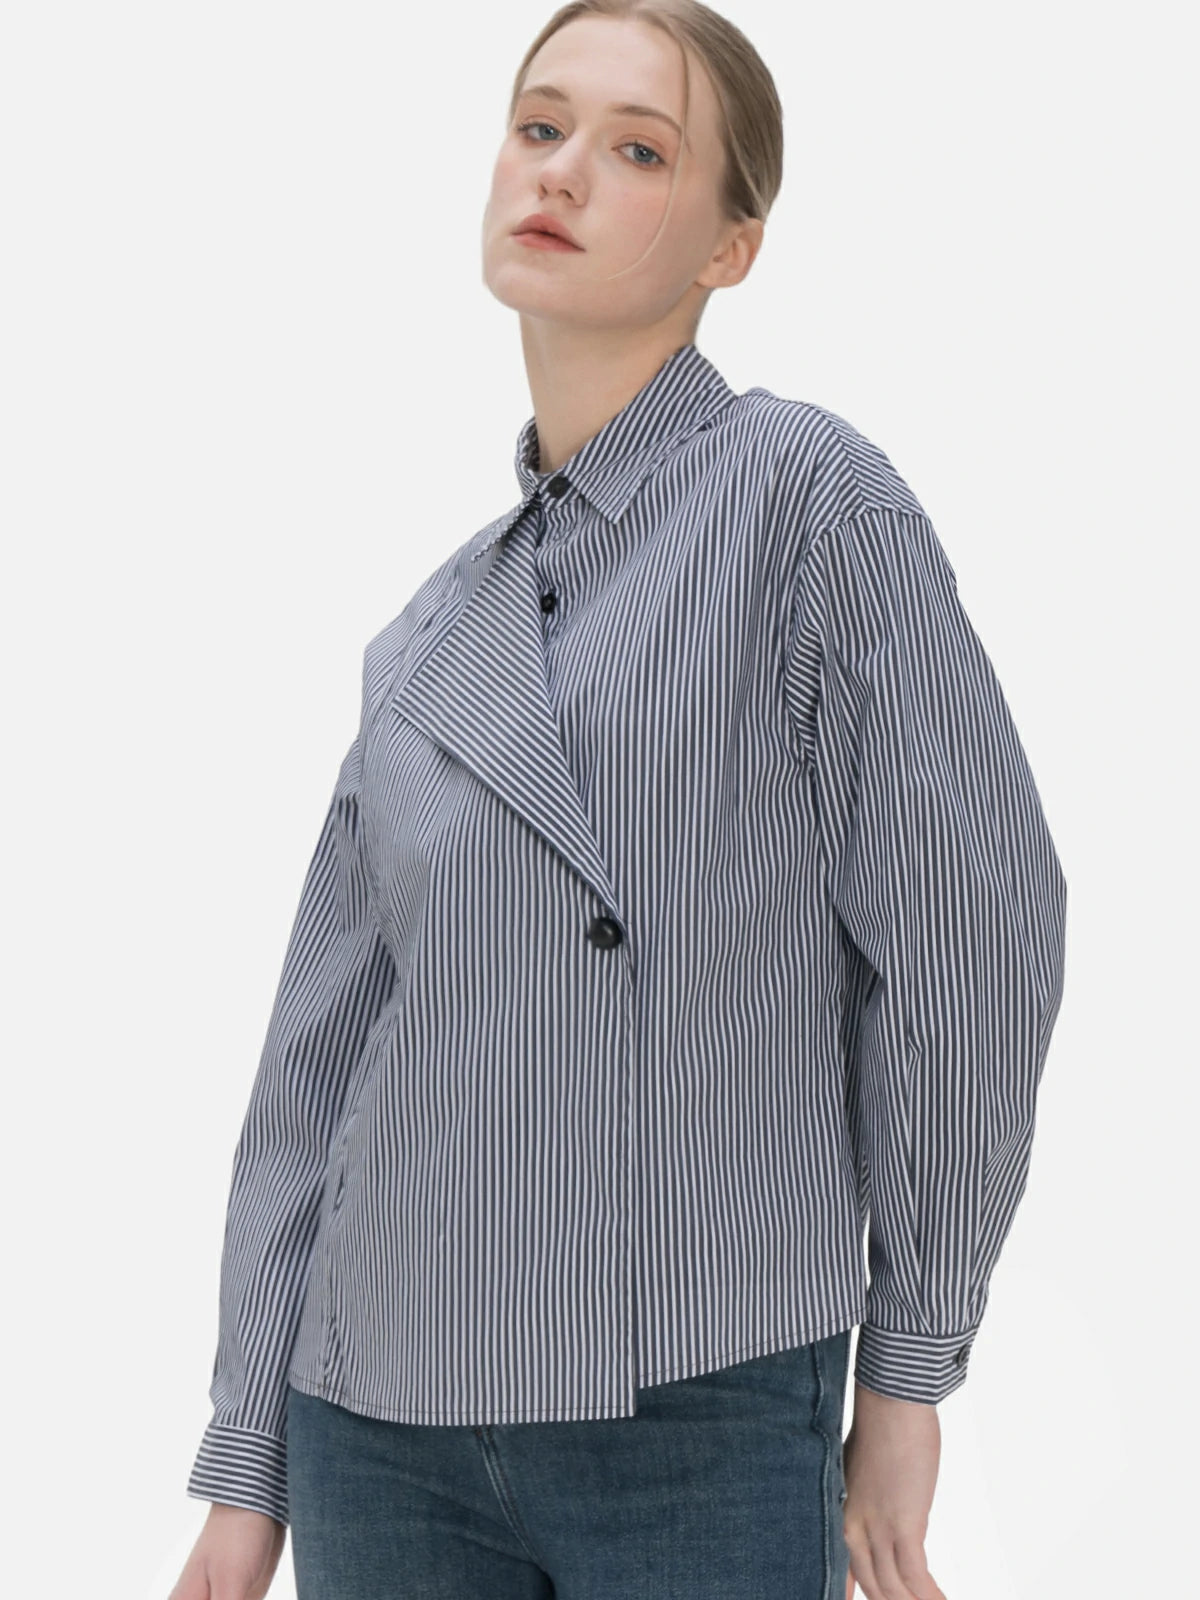 Tailored fit blue and white striped shirt for a comfortable feel